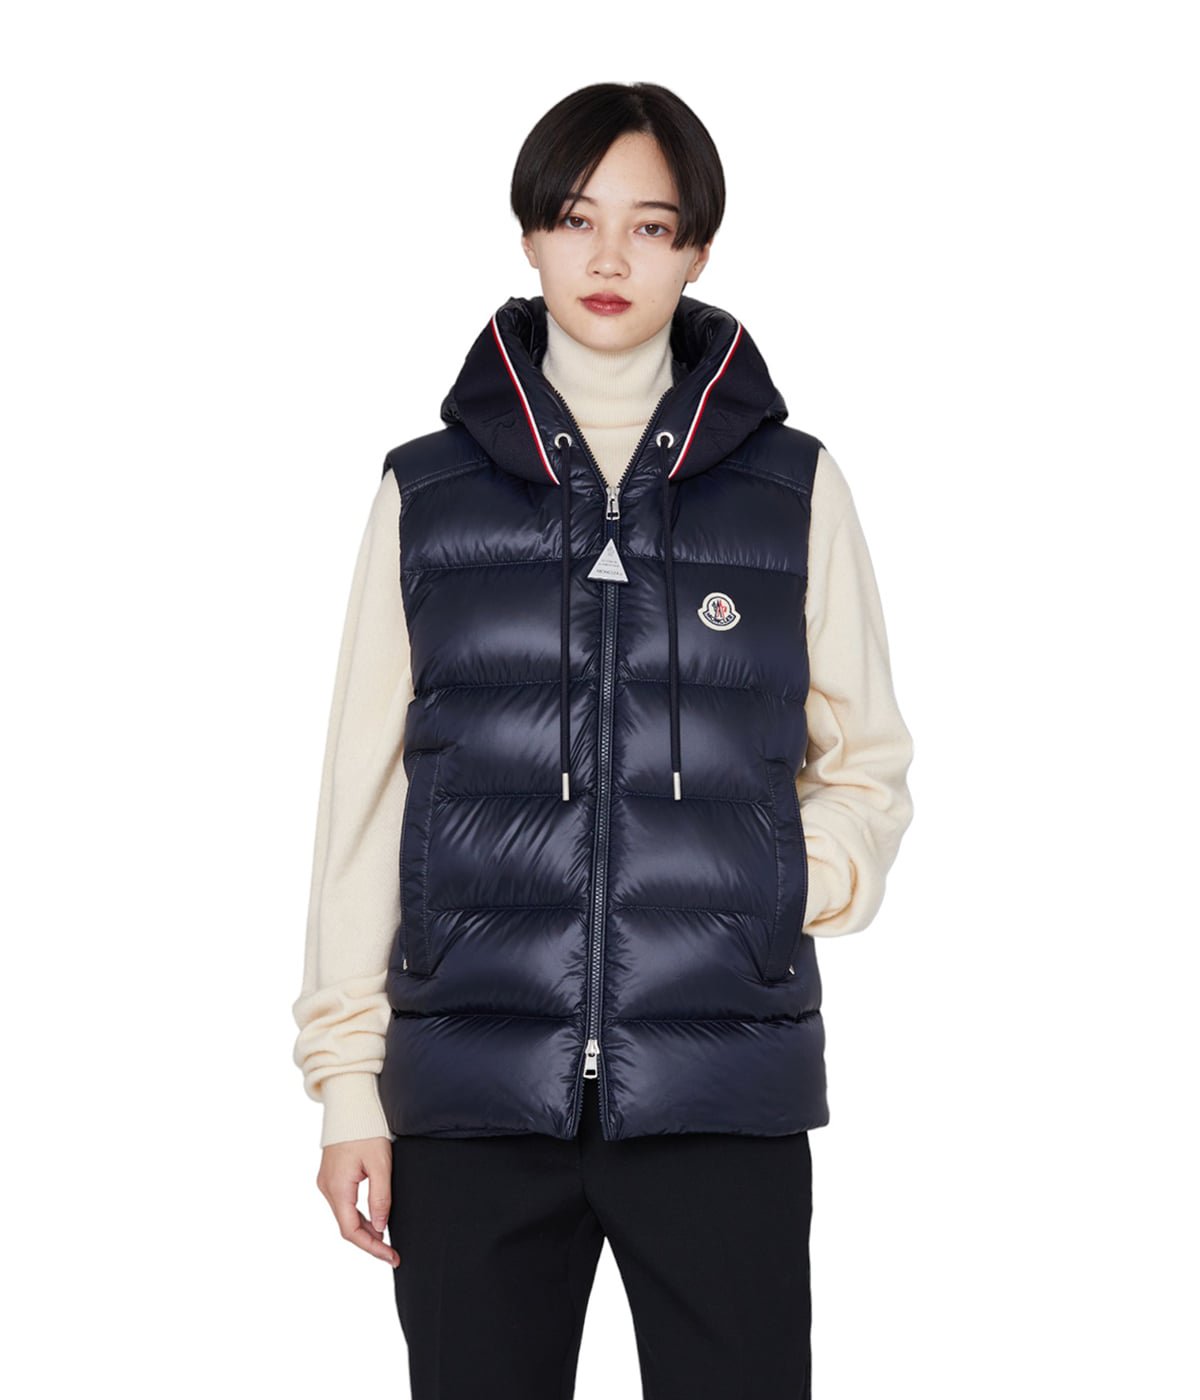 ONLY ARK】Exclusive LUIRO GILET - ルイロ ジレ - | MONCLER ...